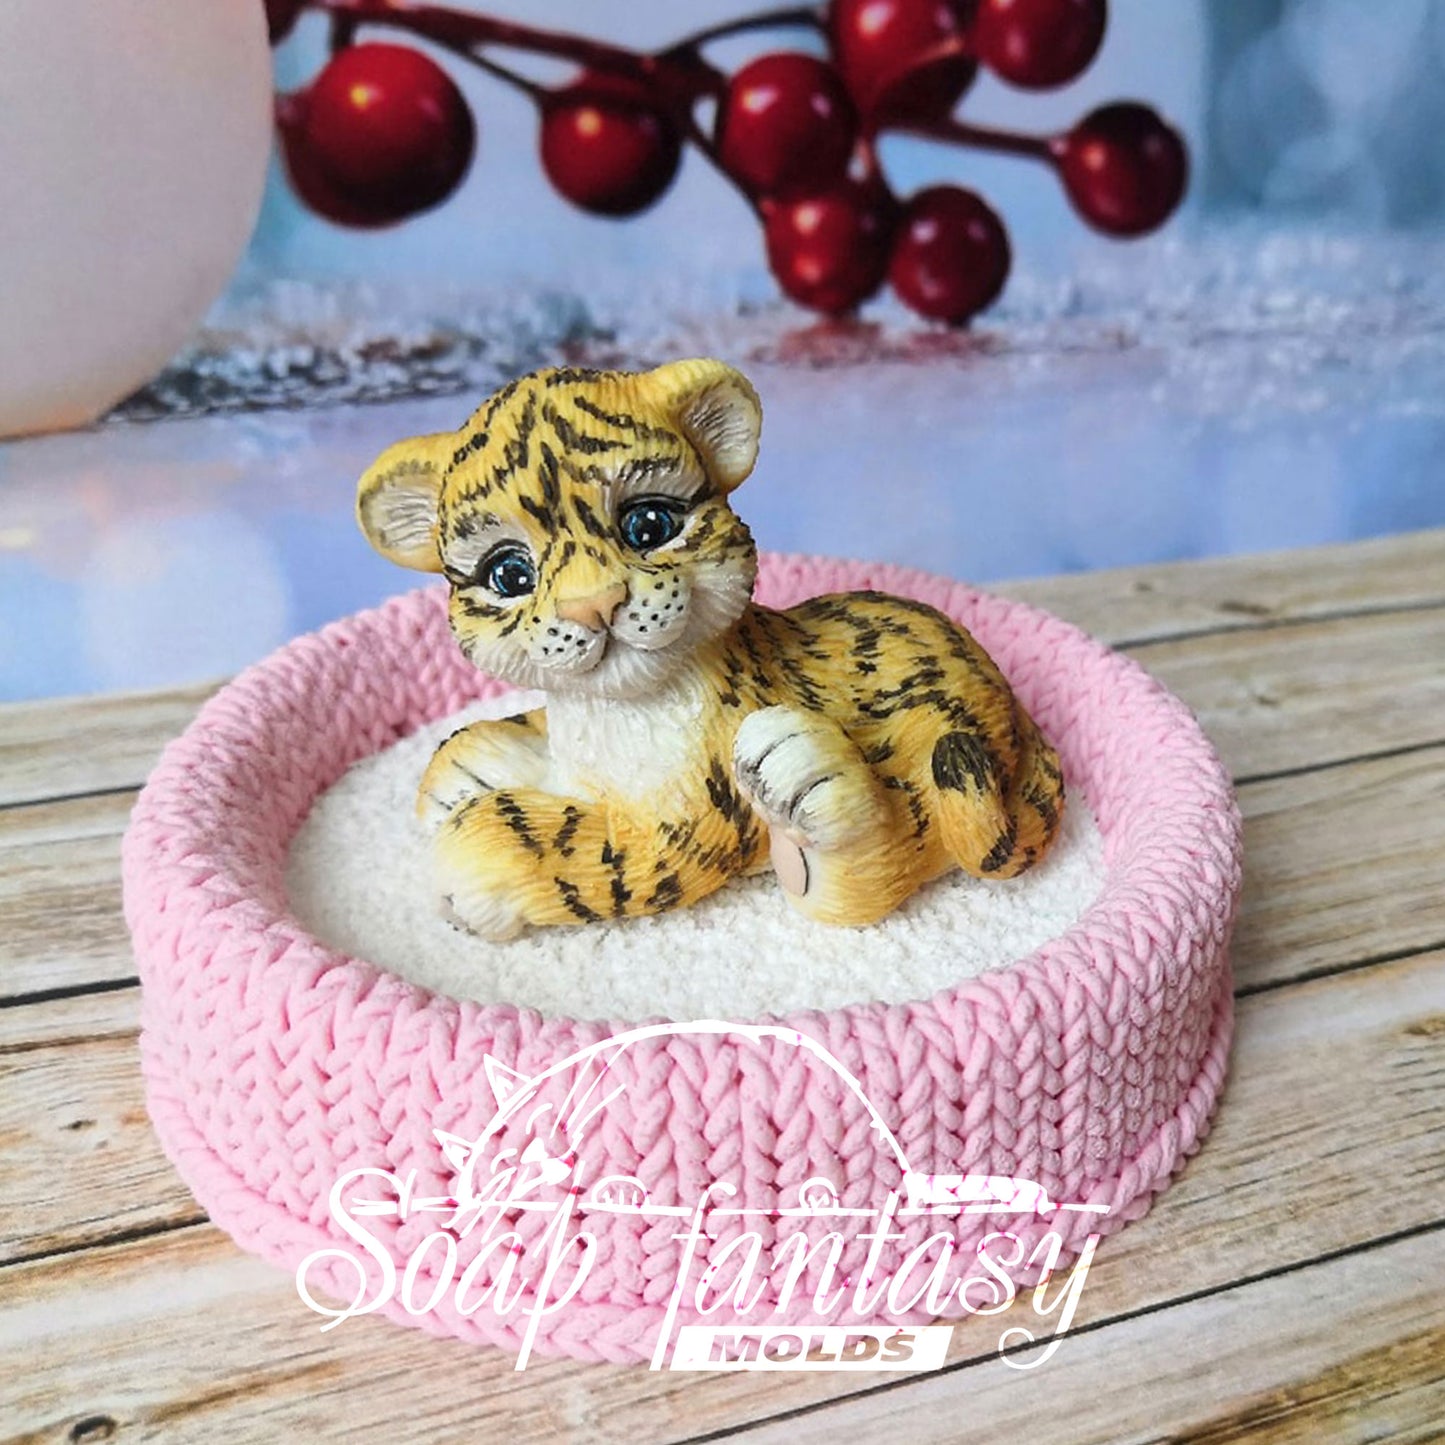 Knitted bed (WITHOUT TIGER CUBS!) silicone mold for soap making